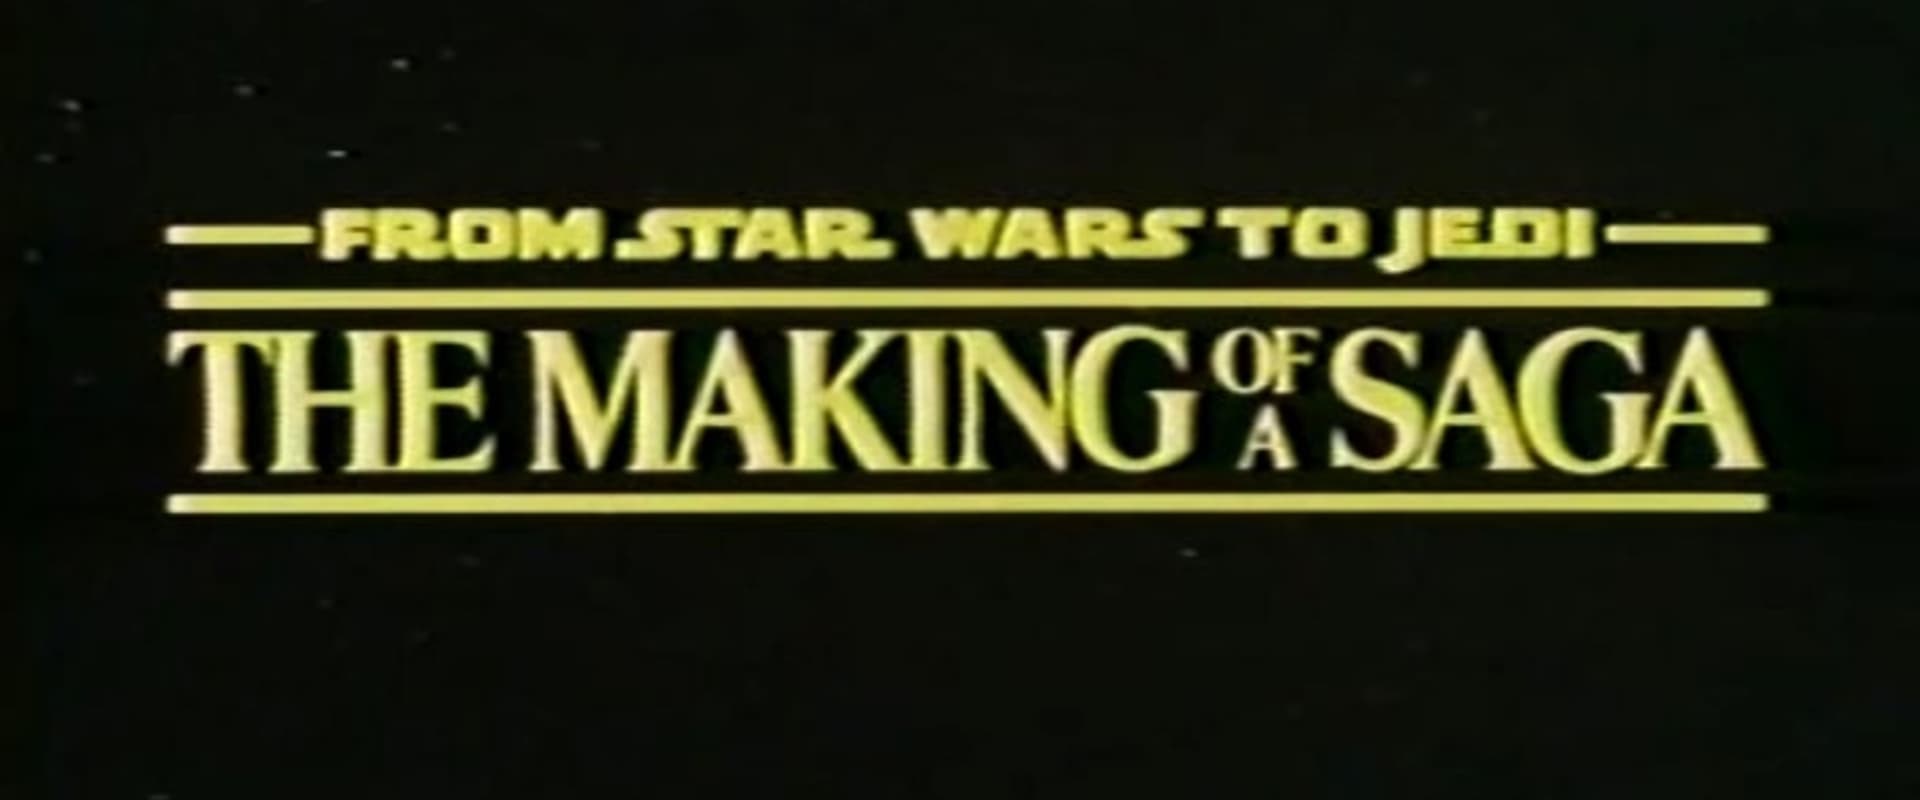 From Star Wars to Jedi: The Making of a Saga